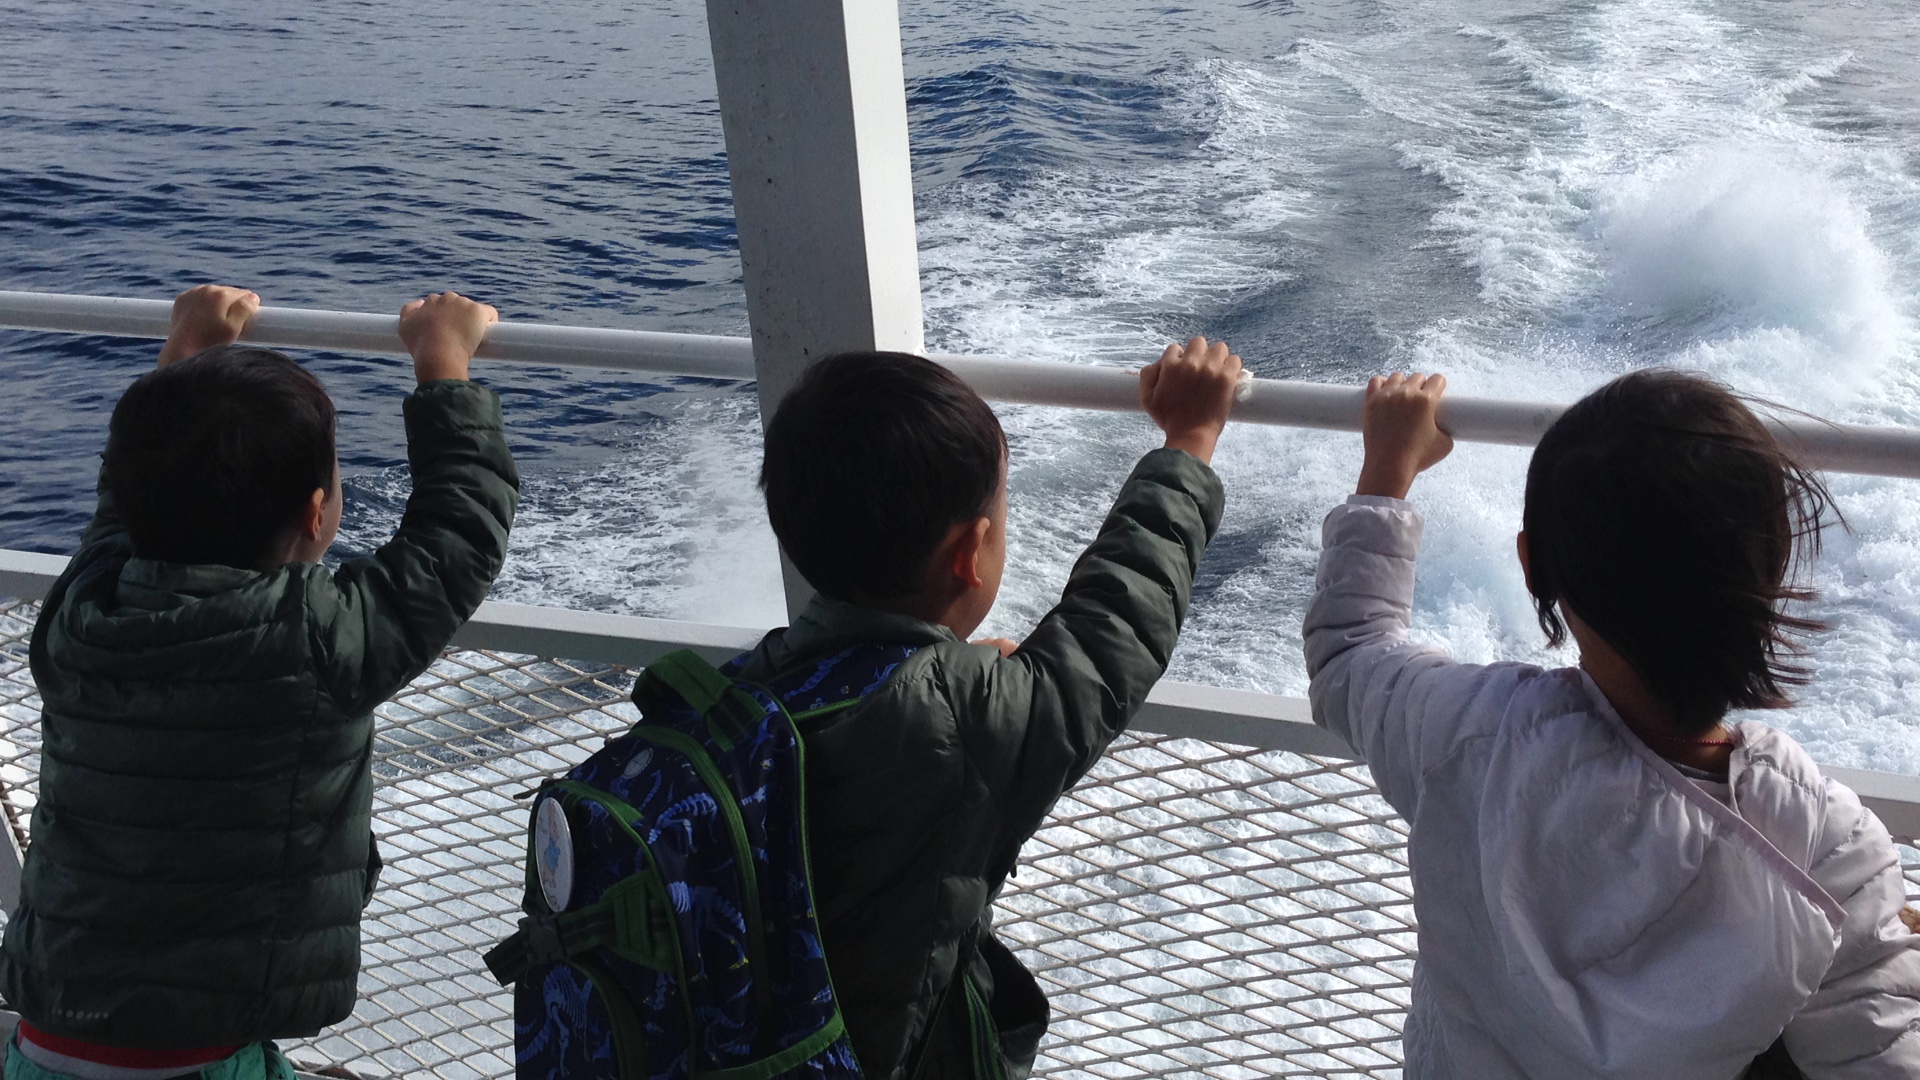 Triplets First Catalina Flyer Ferry Ride